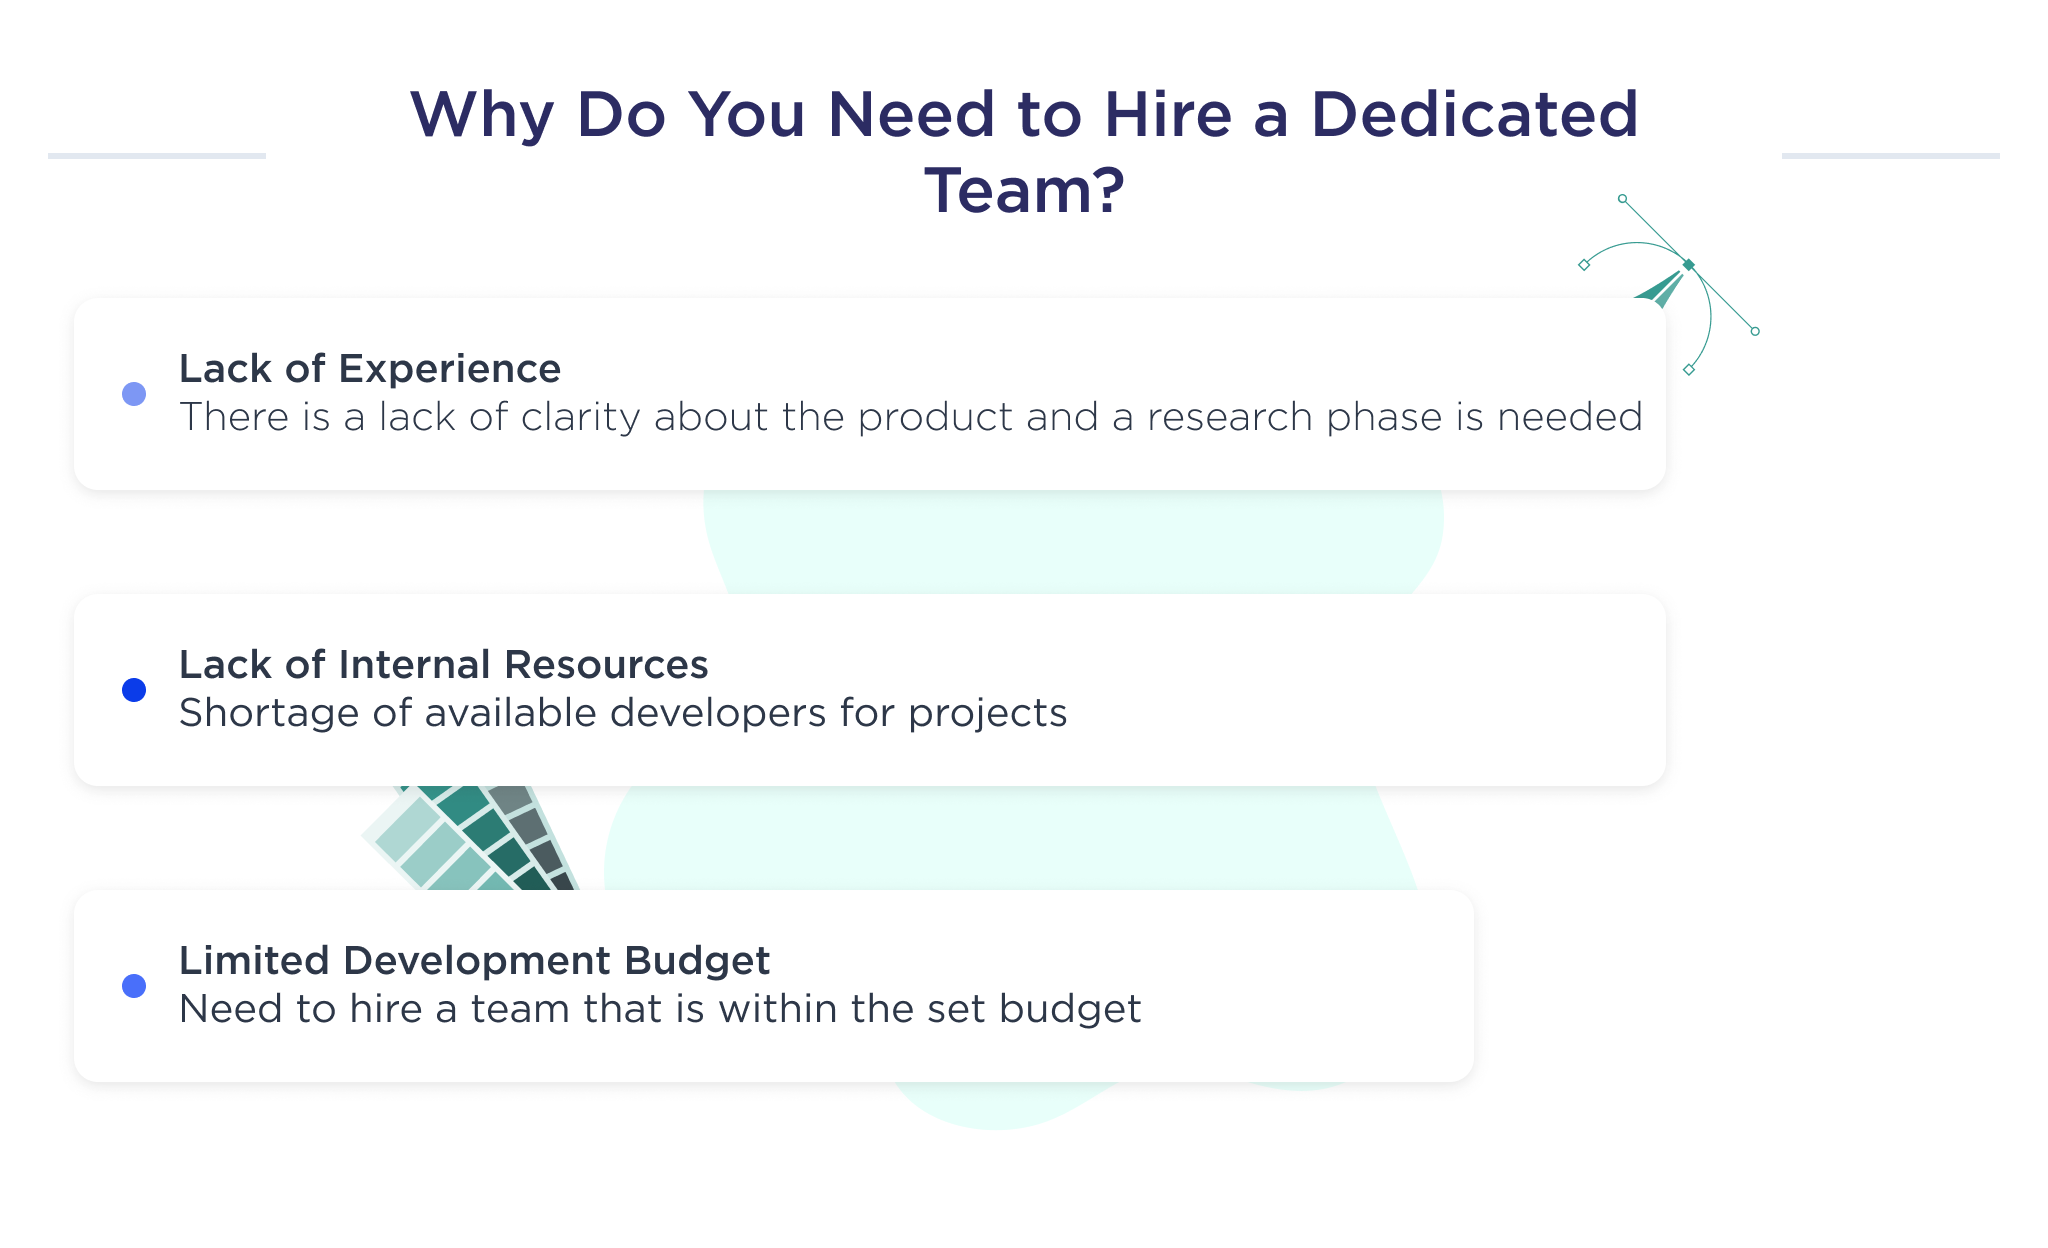 The illustration shows the main reasons for hiring a dedicated team